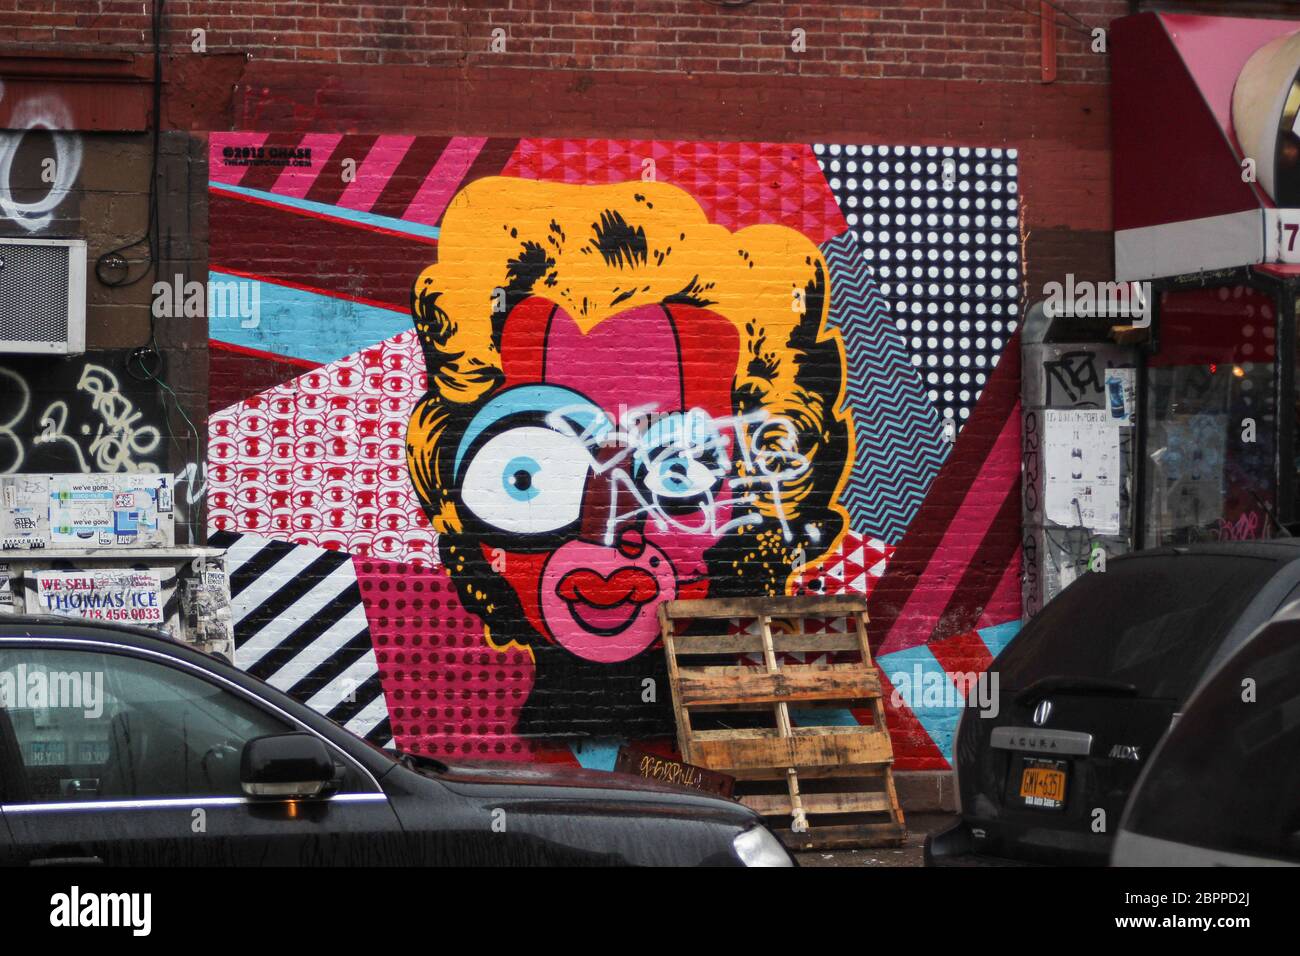 Geezer Monroe, a pop art revision on Marilyn Monroe by The Art of Chase, in Williamsburg district of Brooklyn, New York City, United States of America Stock Photo